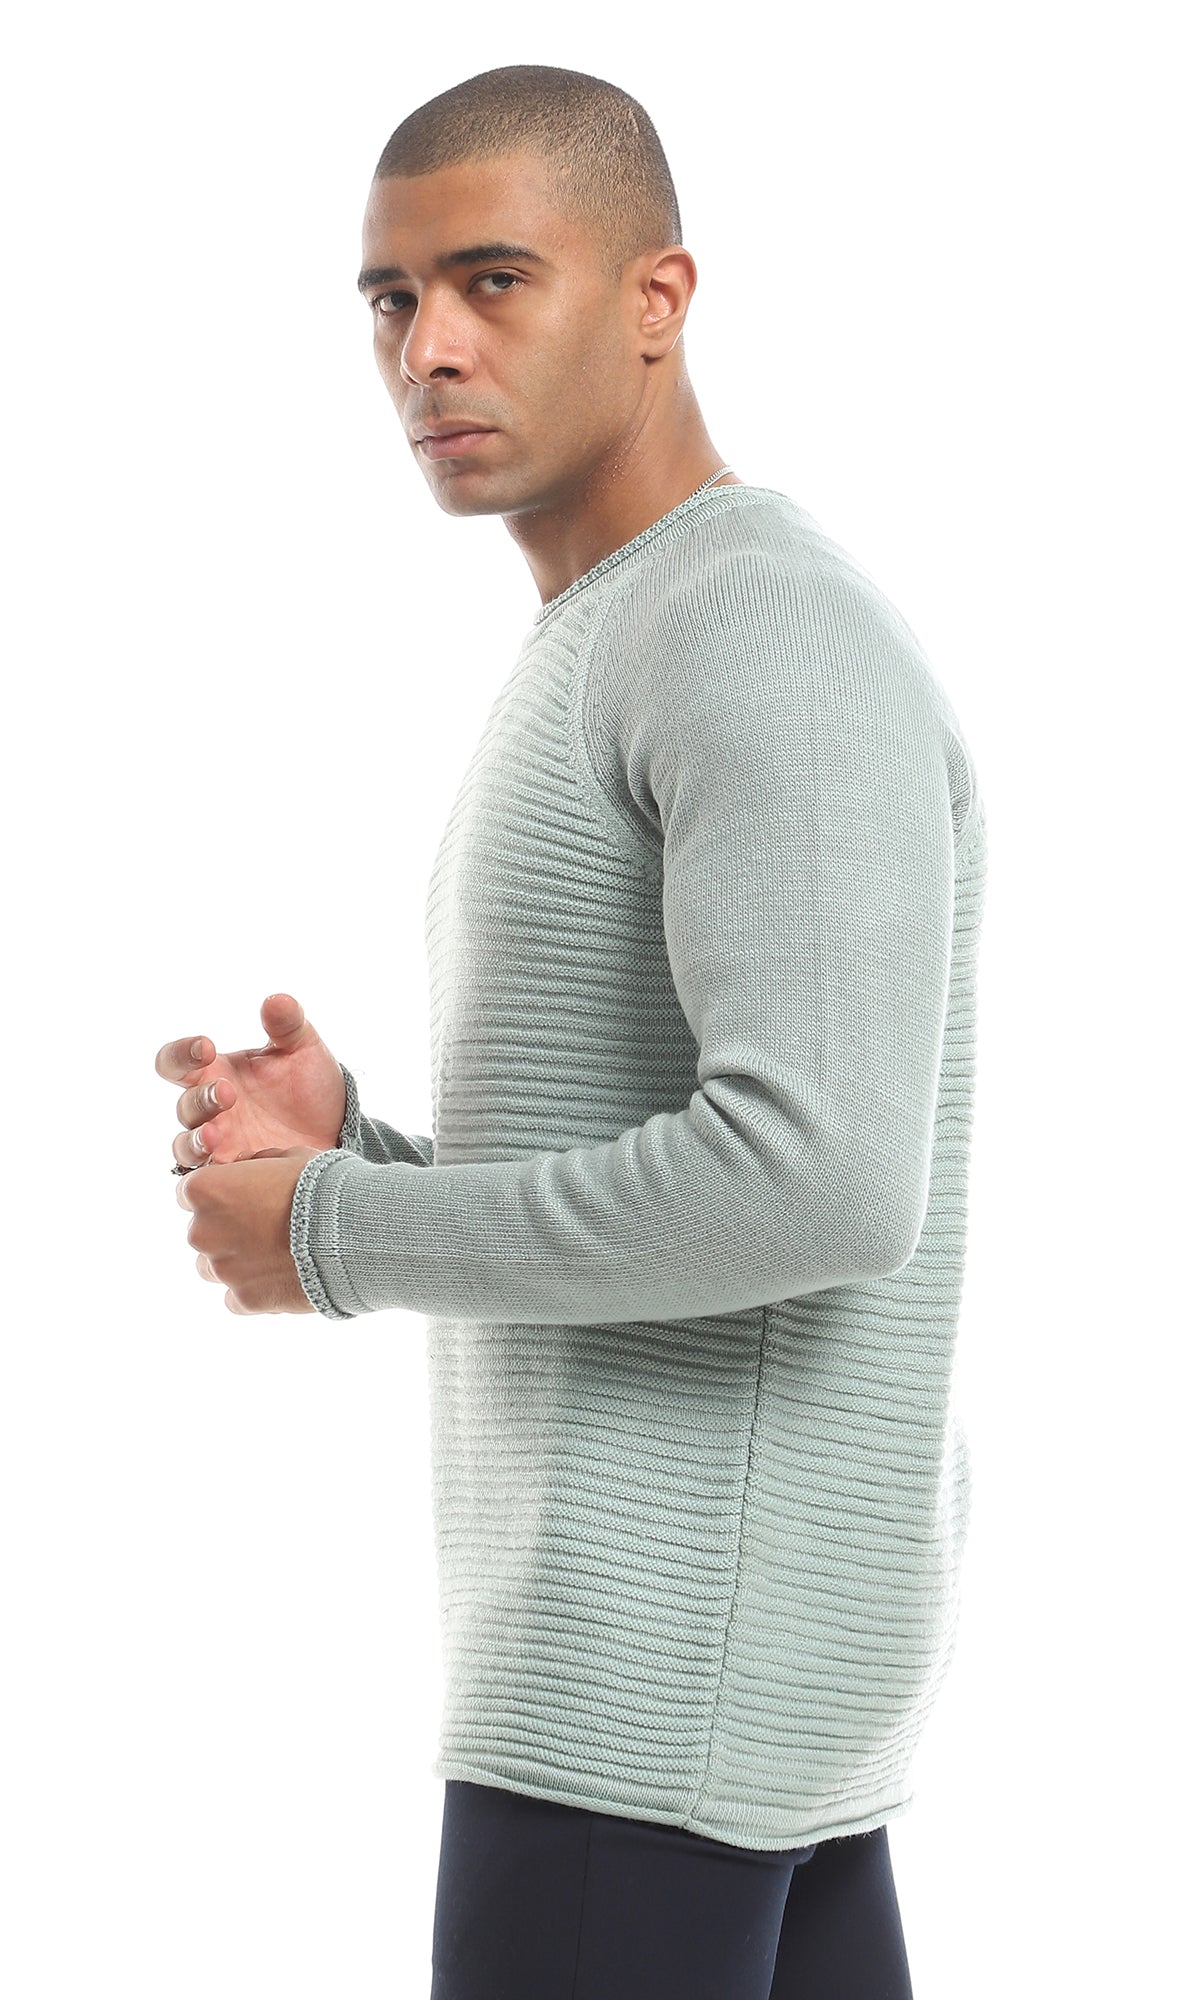 O154333 Striped Knitted Slip On Pullover - Mint Green